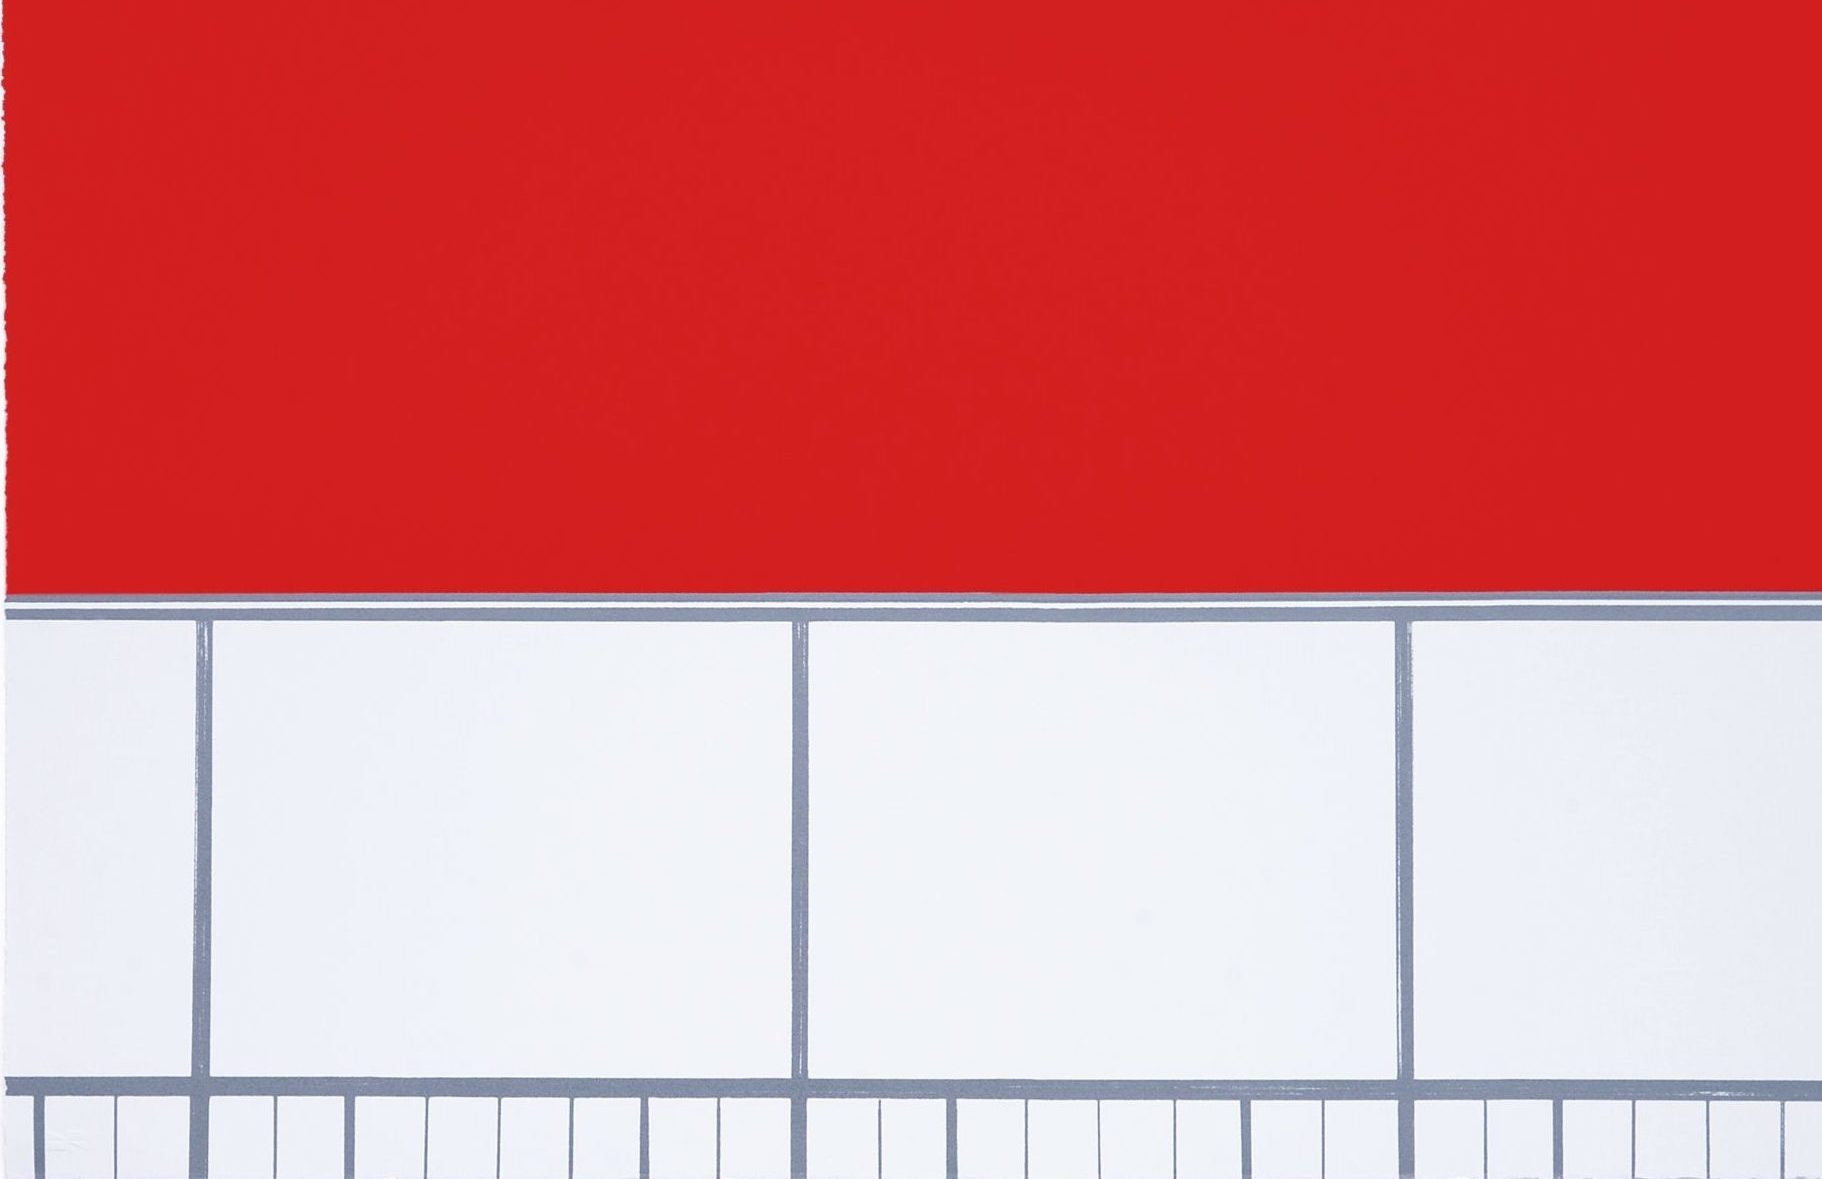 red colorblock above white squares and rectangles.